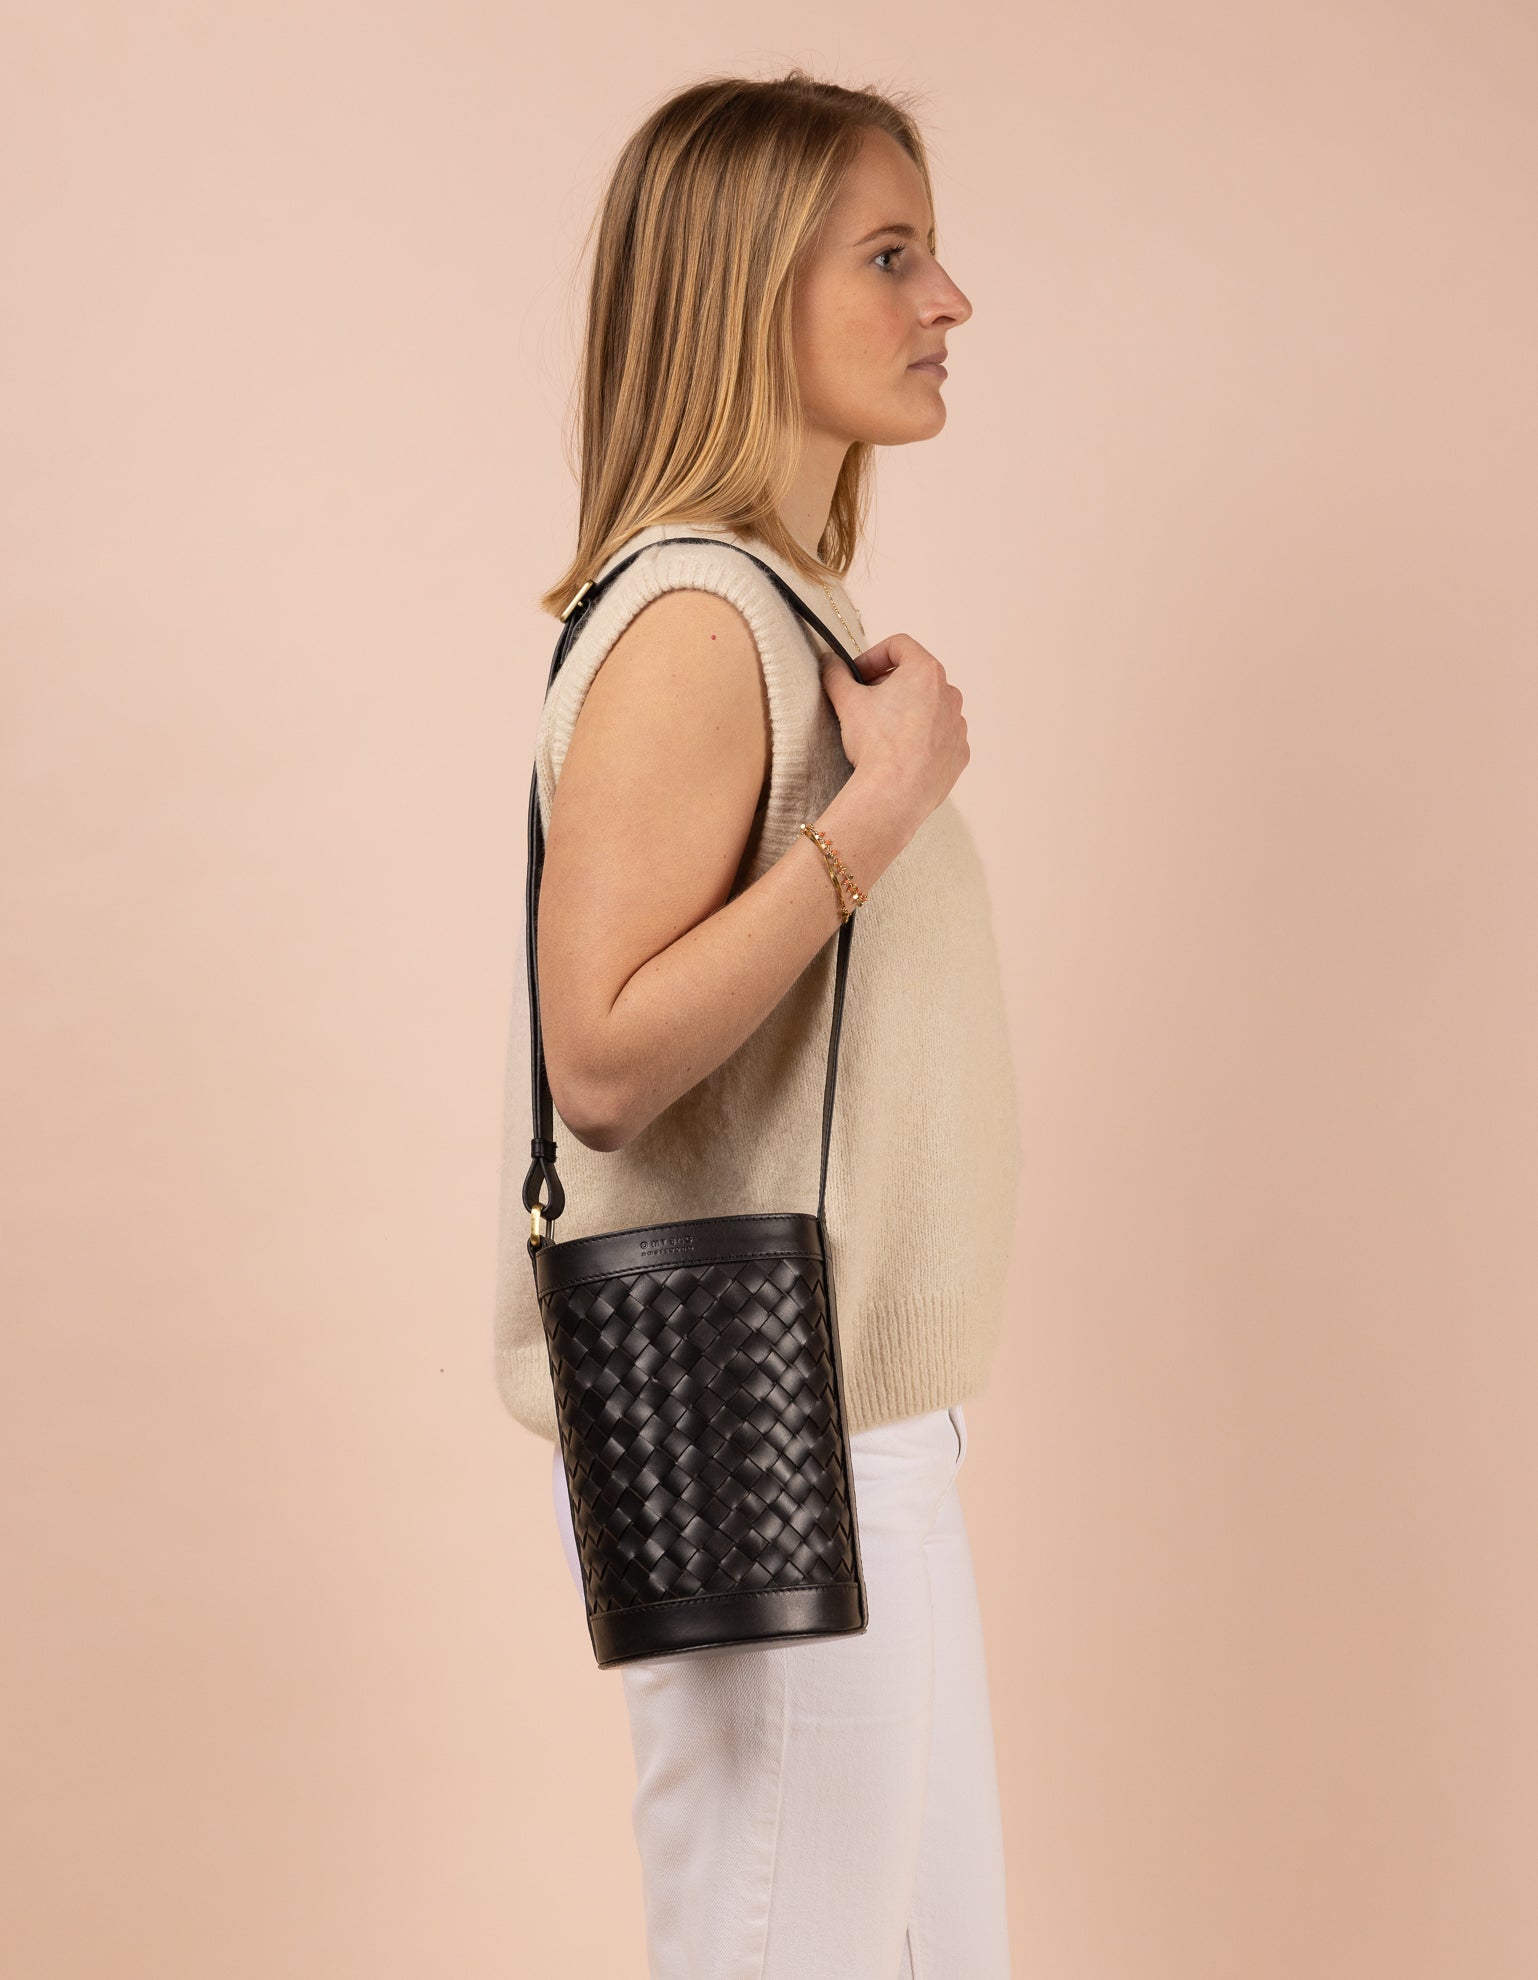 o my bag / With a round design, drawstring closure, and an adjustable leather strap, Zola adapts effortlessly to your style. Inside, find a zipper pocket and slip pocket for organization. Zola transitions seamlessly from shoulder to cross-body. Ethically made in India.